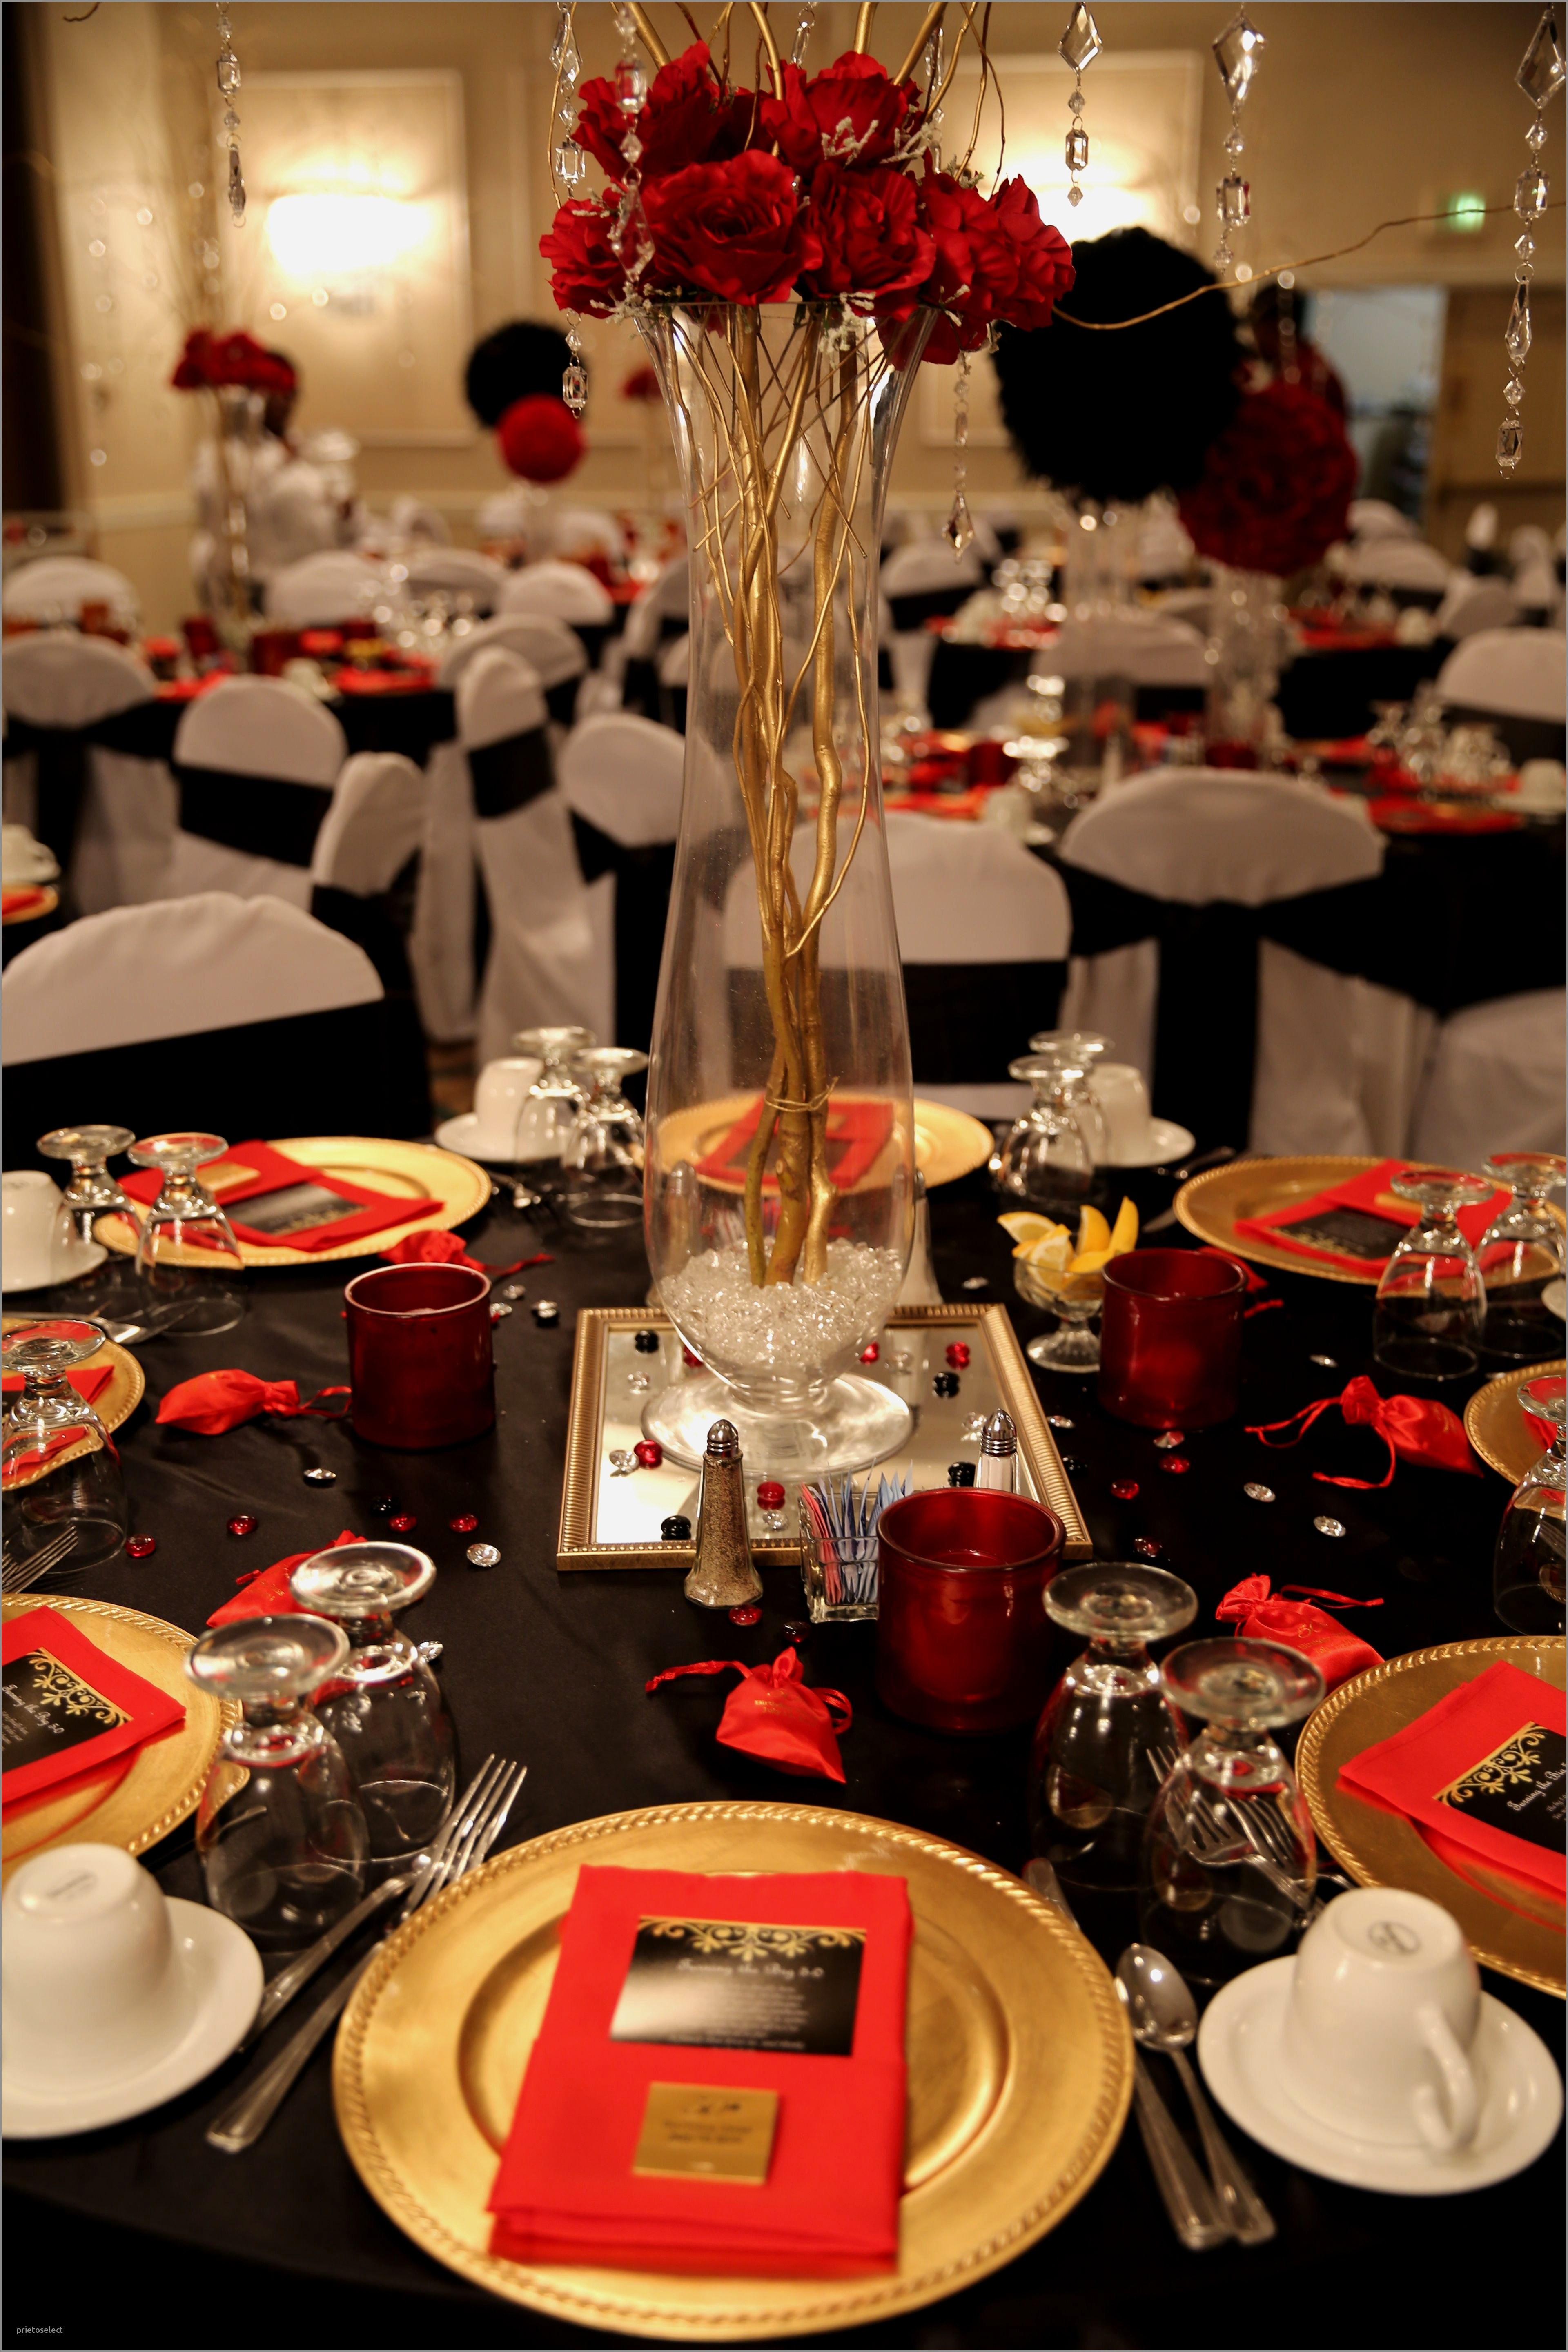 21 Spectacular Glass Vase Fillers Ideas 2024 free download glass vase fillers ideas of 75th birthday table decorations awesome ac2a2ec286a 15 cheap and easy diy pertaining to 75th birthday table decorations best of red black and gold table decoratio